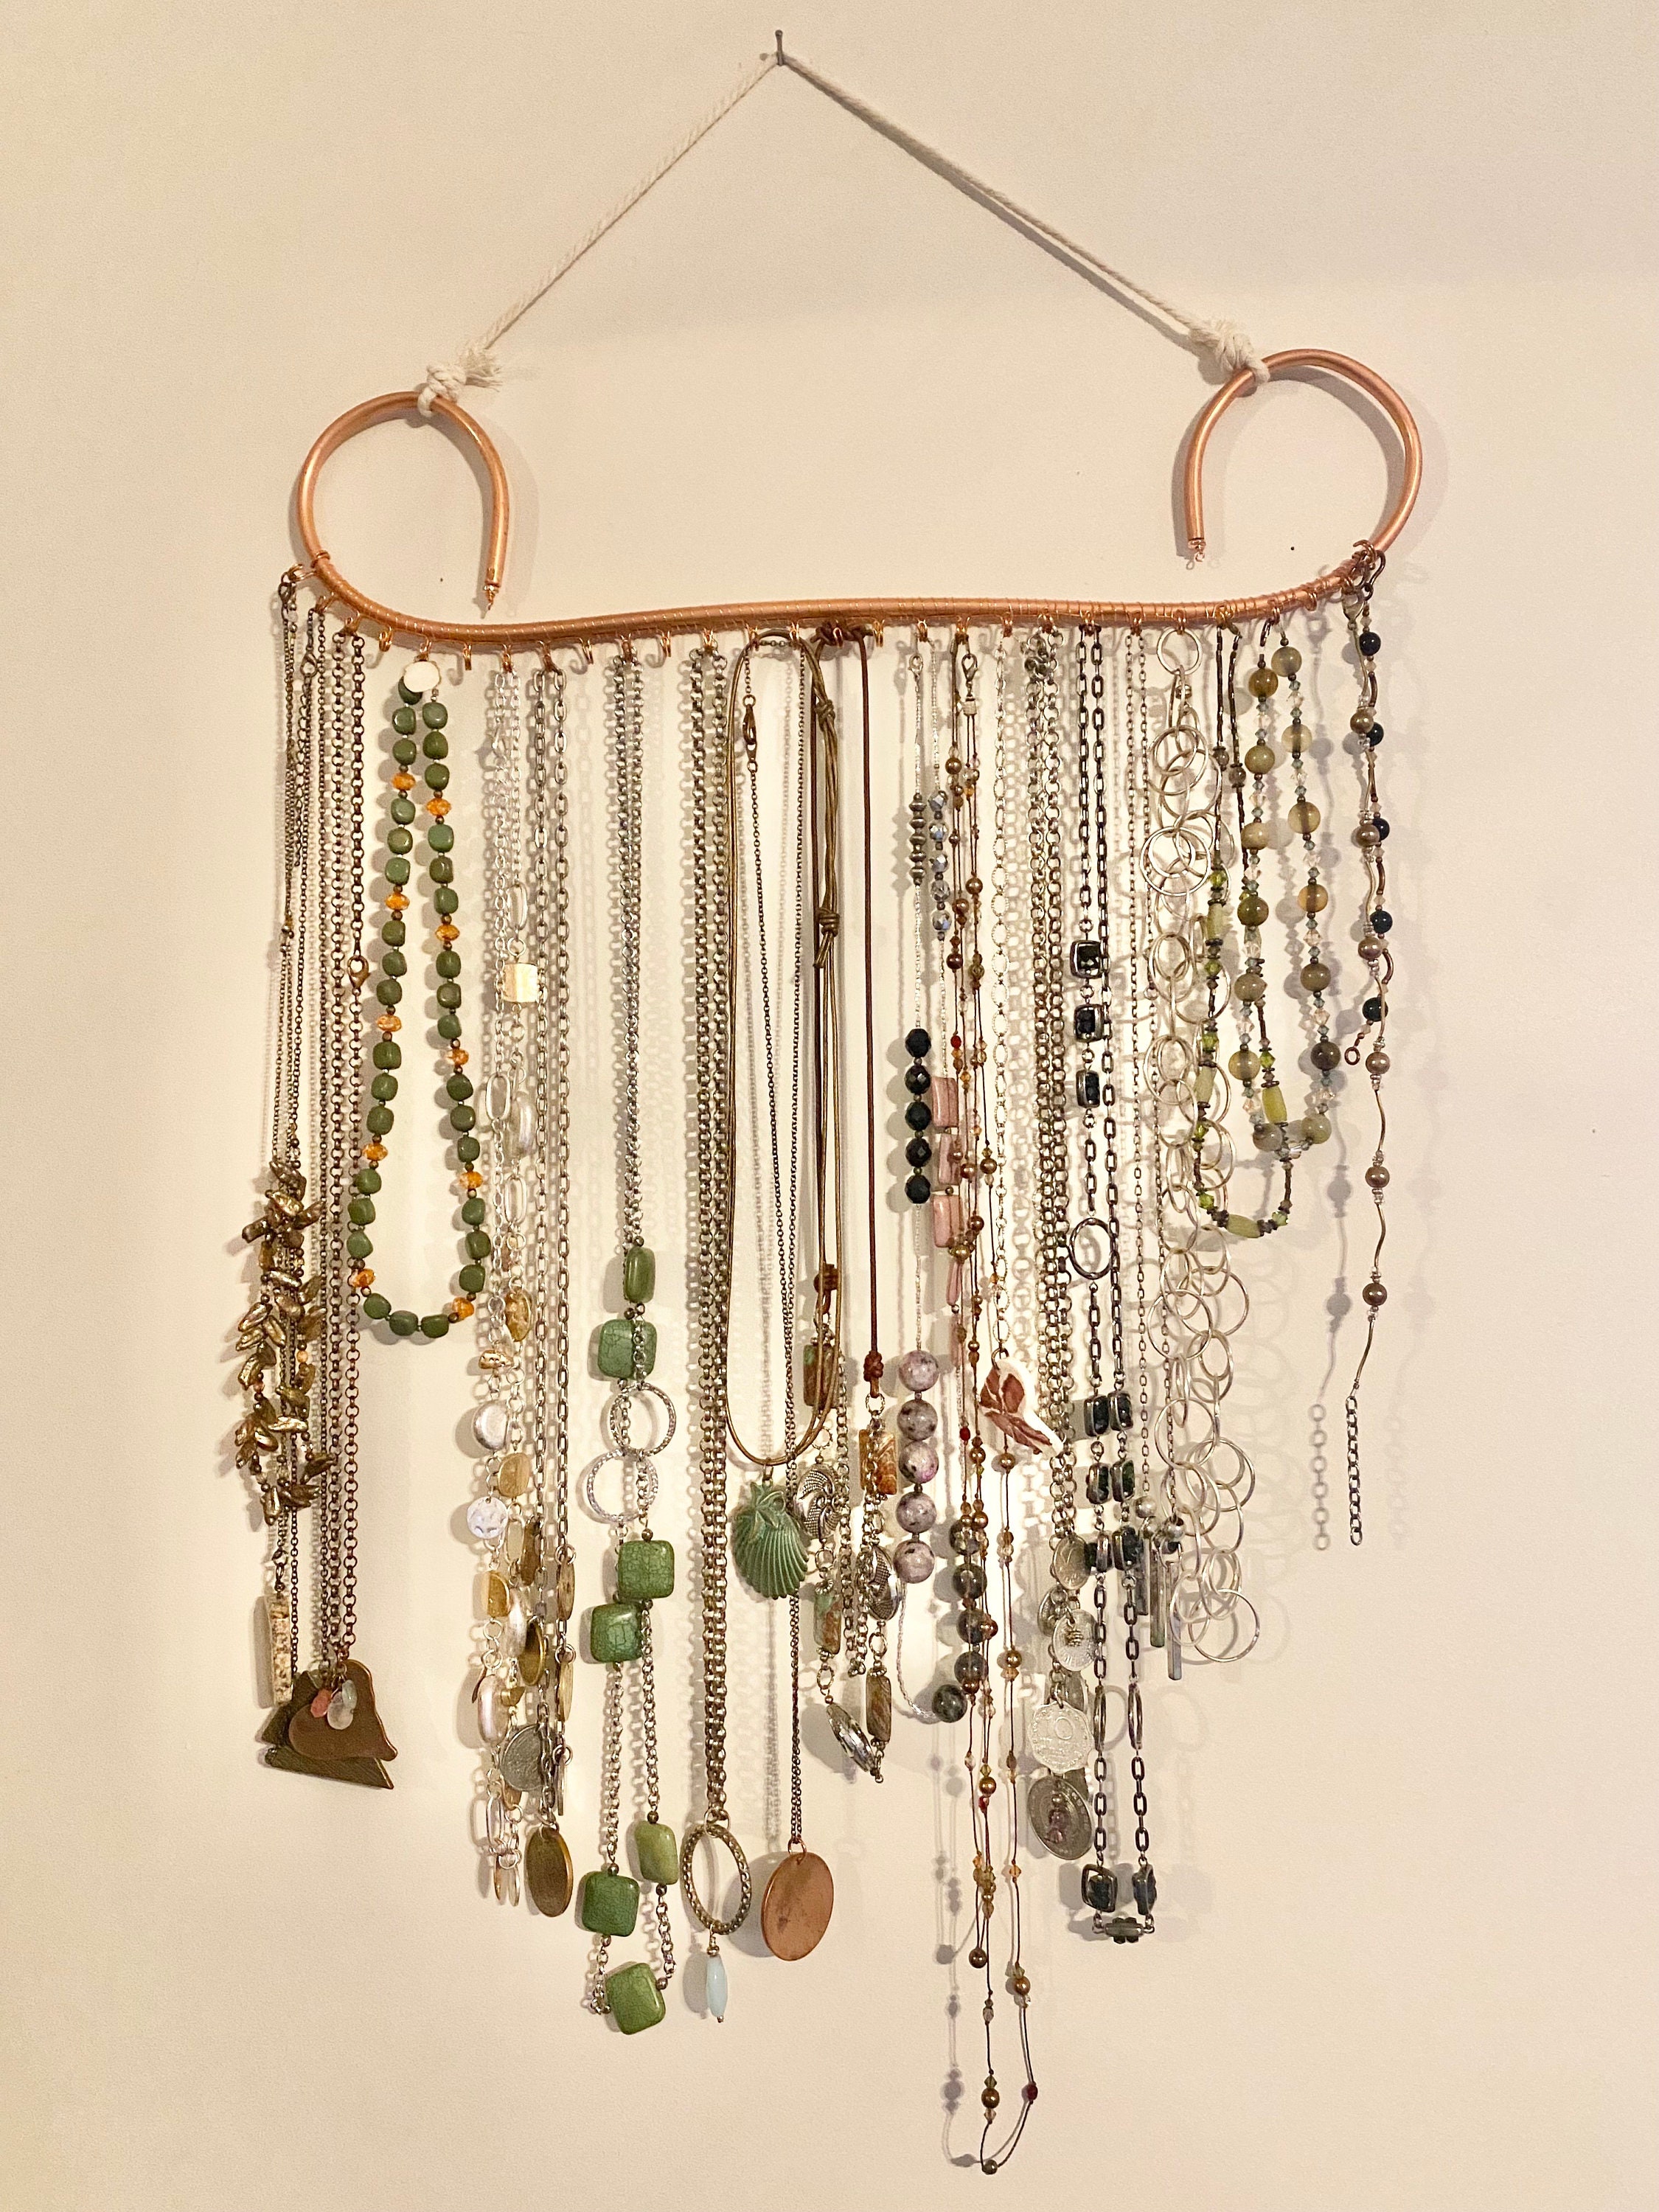 Jewelry Organizer Necklace Holder Wall Mounted Rustic Wood, Necklaces,  Earrings Organizer - Etsy | Diy jewelry holder, Necklace holder wall,  Jewelry organizer diy